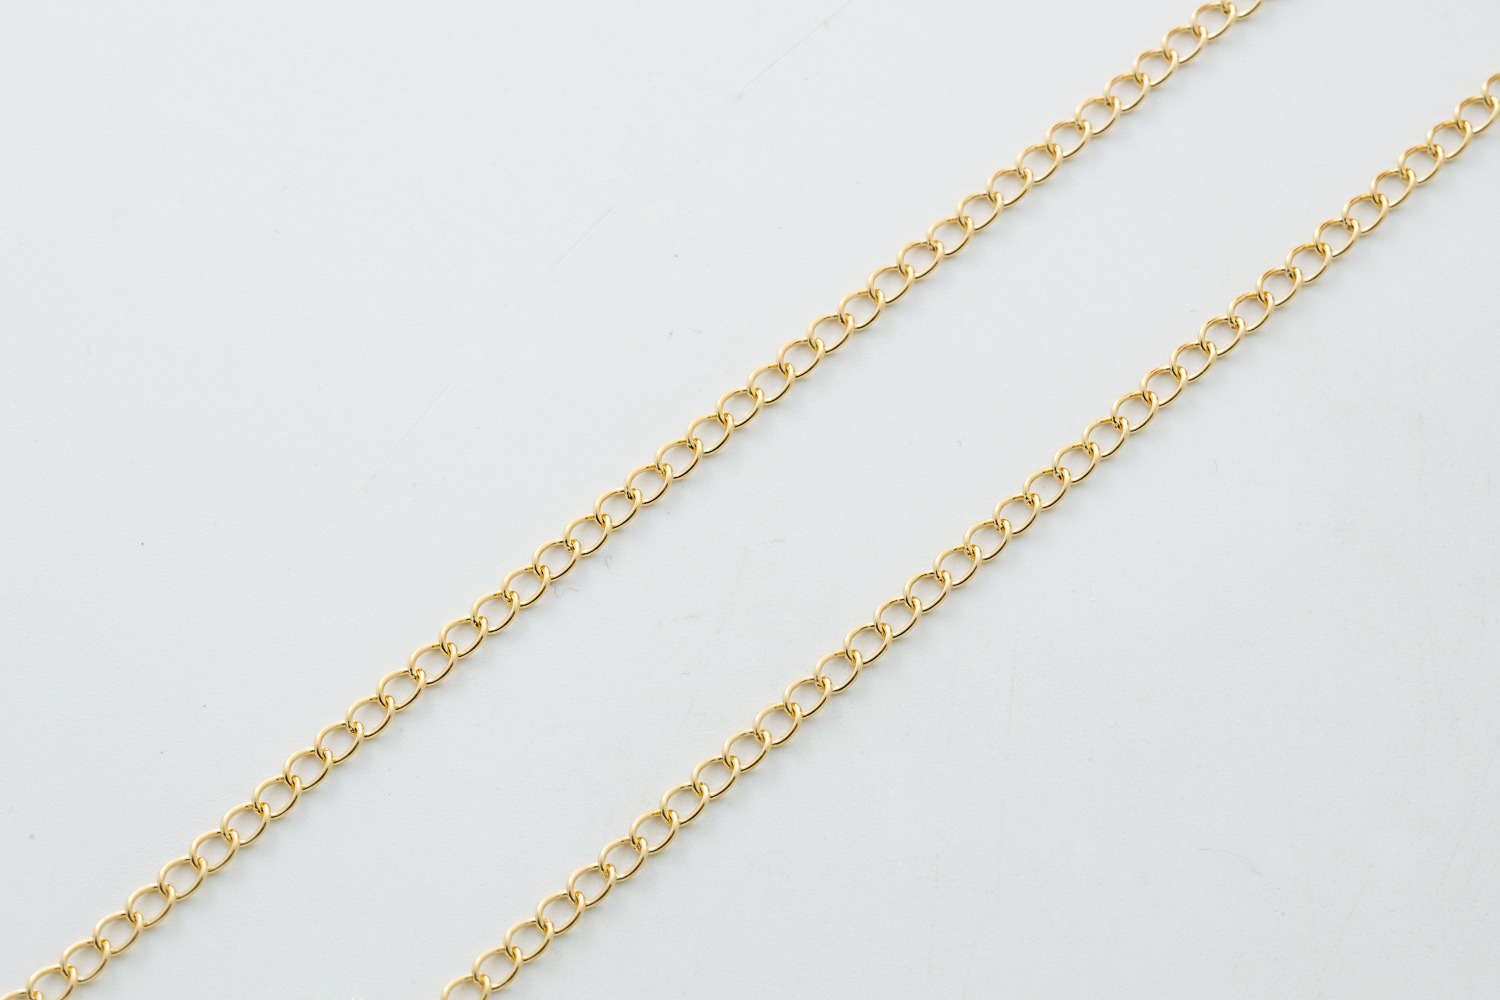 [CJ14-10] Curb extender chain, Red brass, Nickel free, Curb chain, Necklace making supplies, Wholesale jewelry makings, 1m